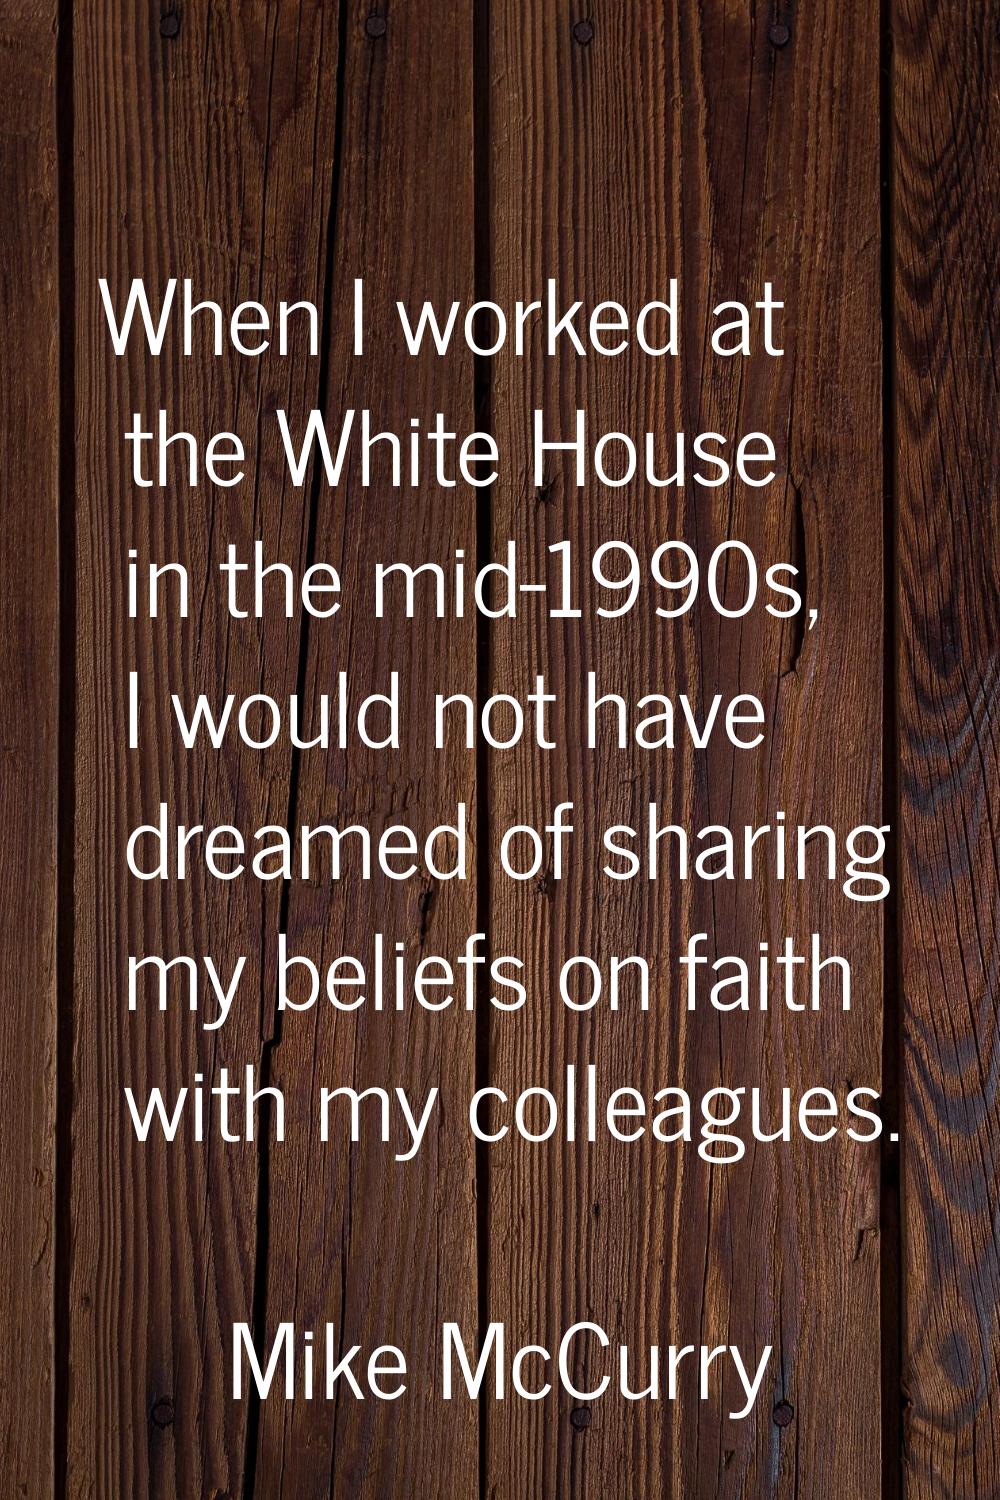 When I worked at the White House in the mid-1990s, I would not have dreamed of sharing my beliefs o